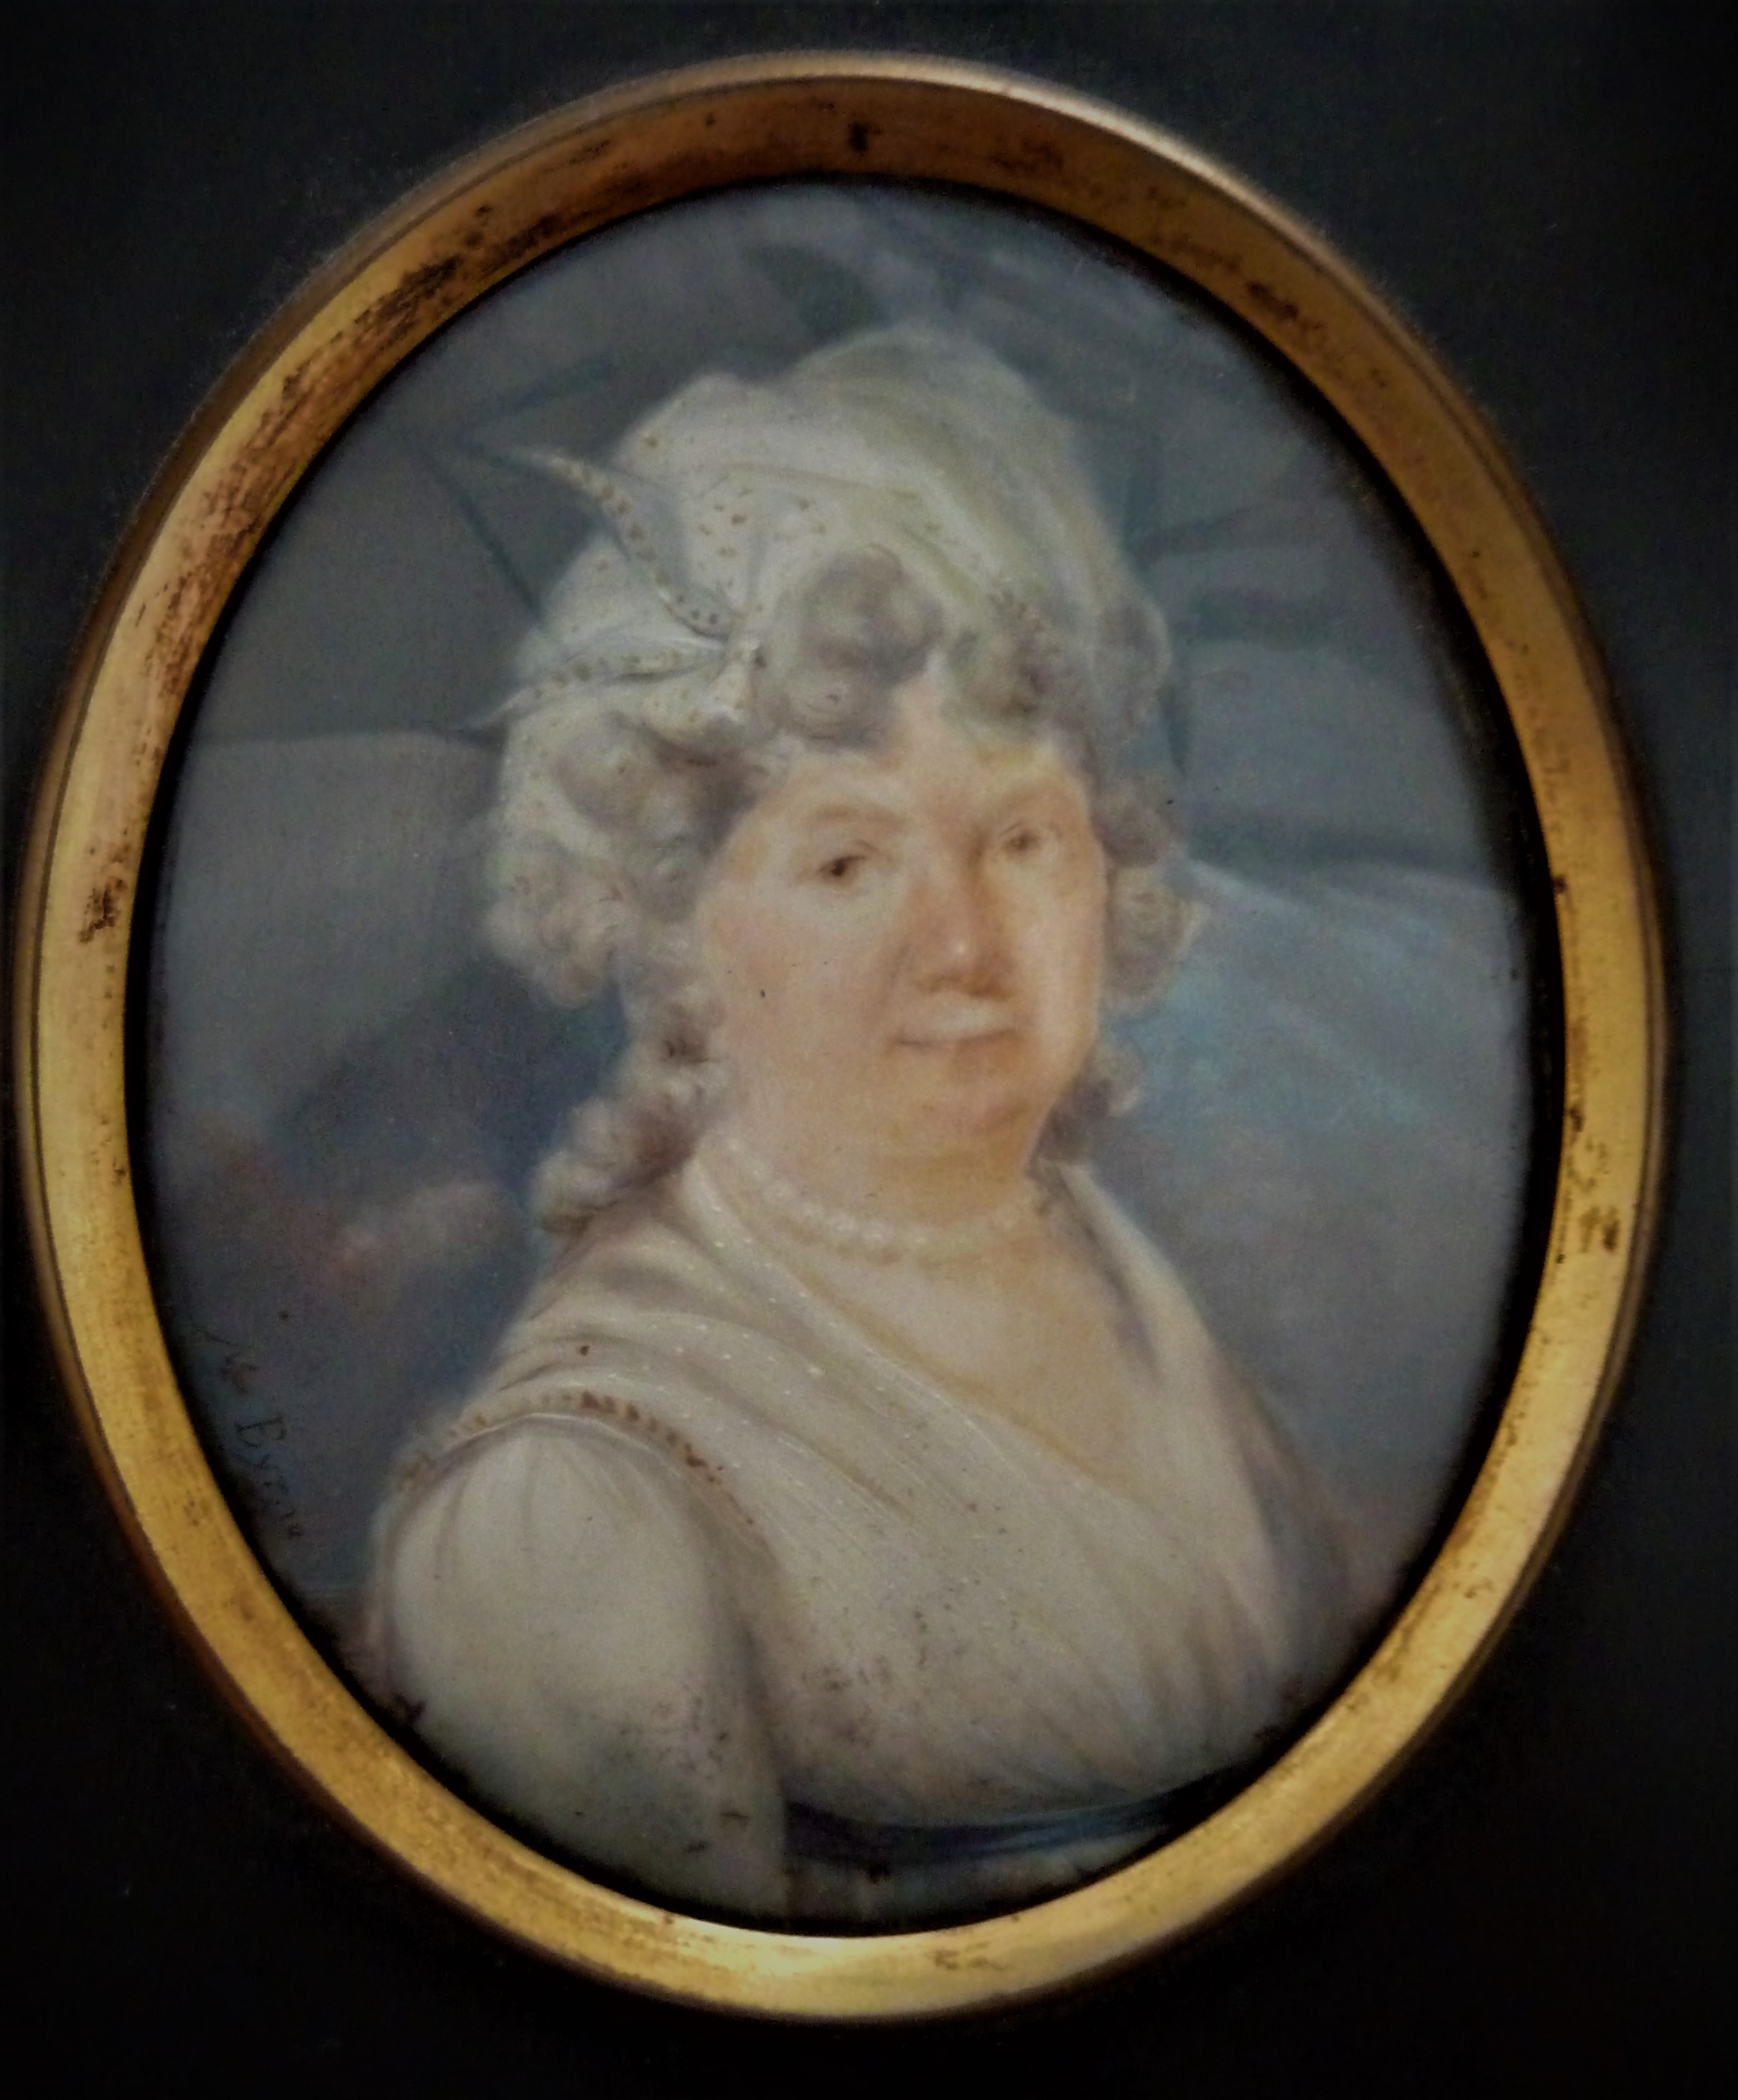 Mary Byrne 1776-1846.
Mary Green Byrne,wife of James Green
Miniature Portrait of 
Isabella Dowager Viscountess   
Harwarden (Nee Monck) 1759-1851 
